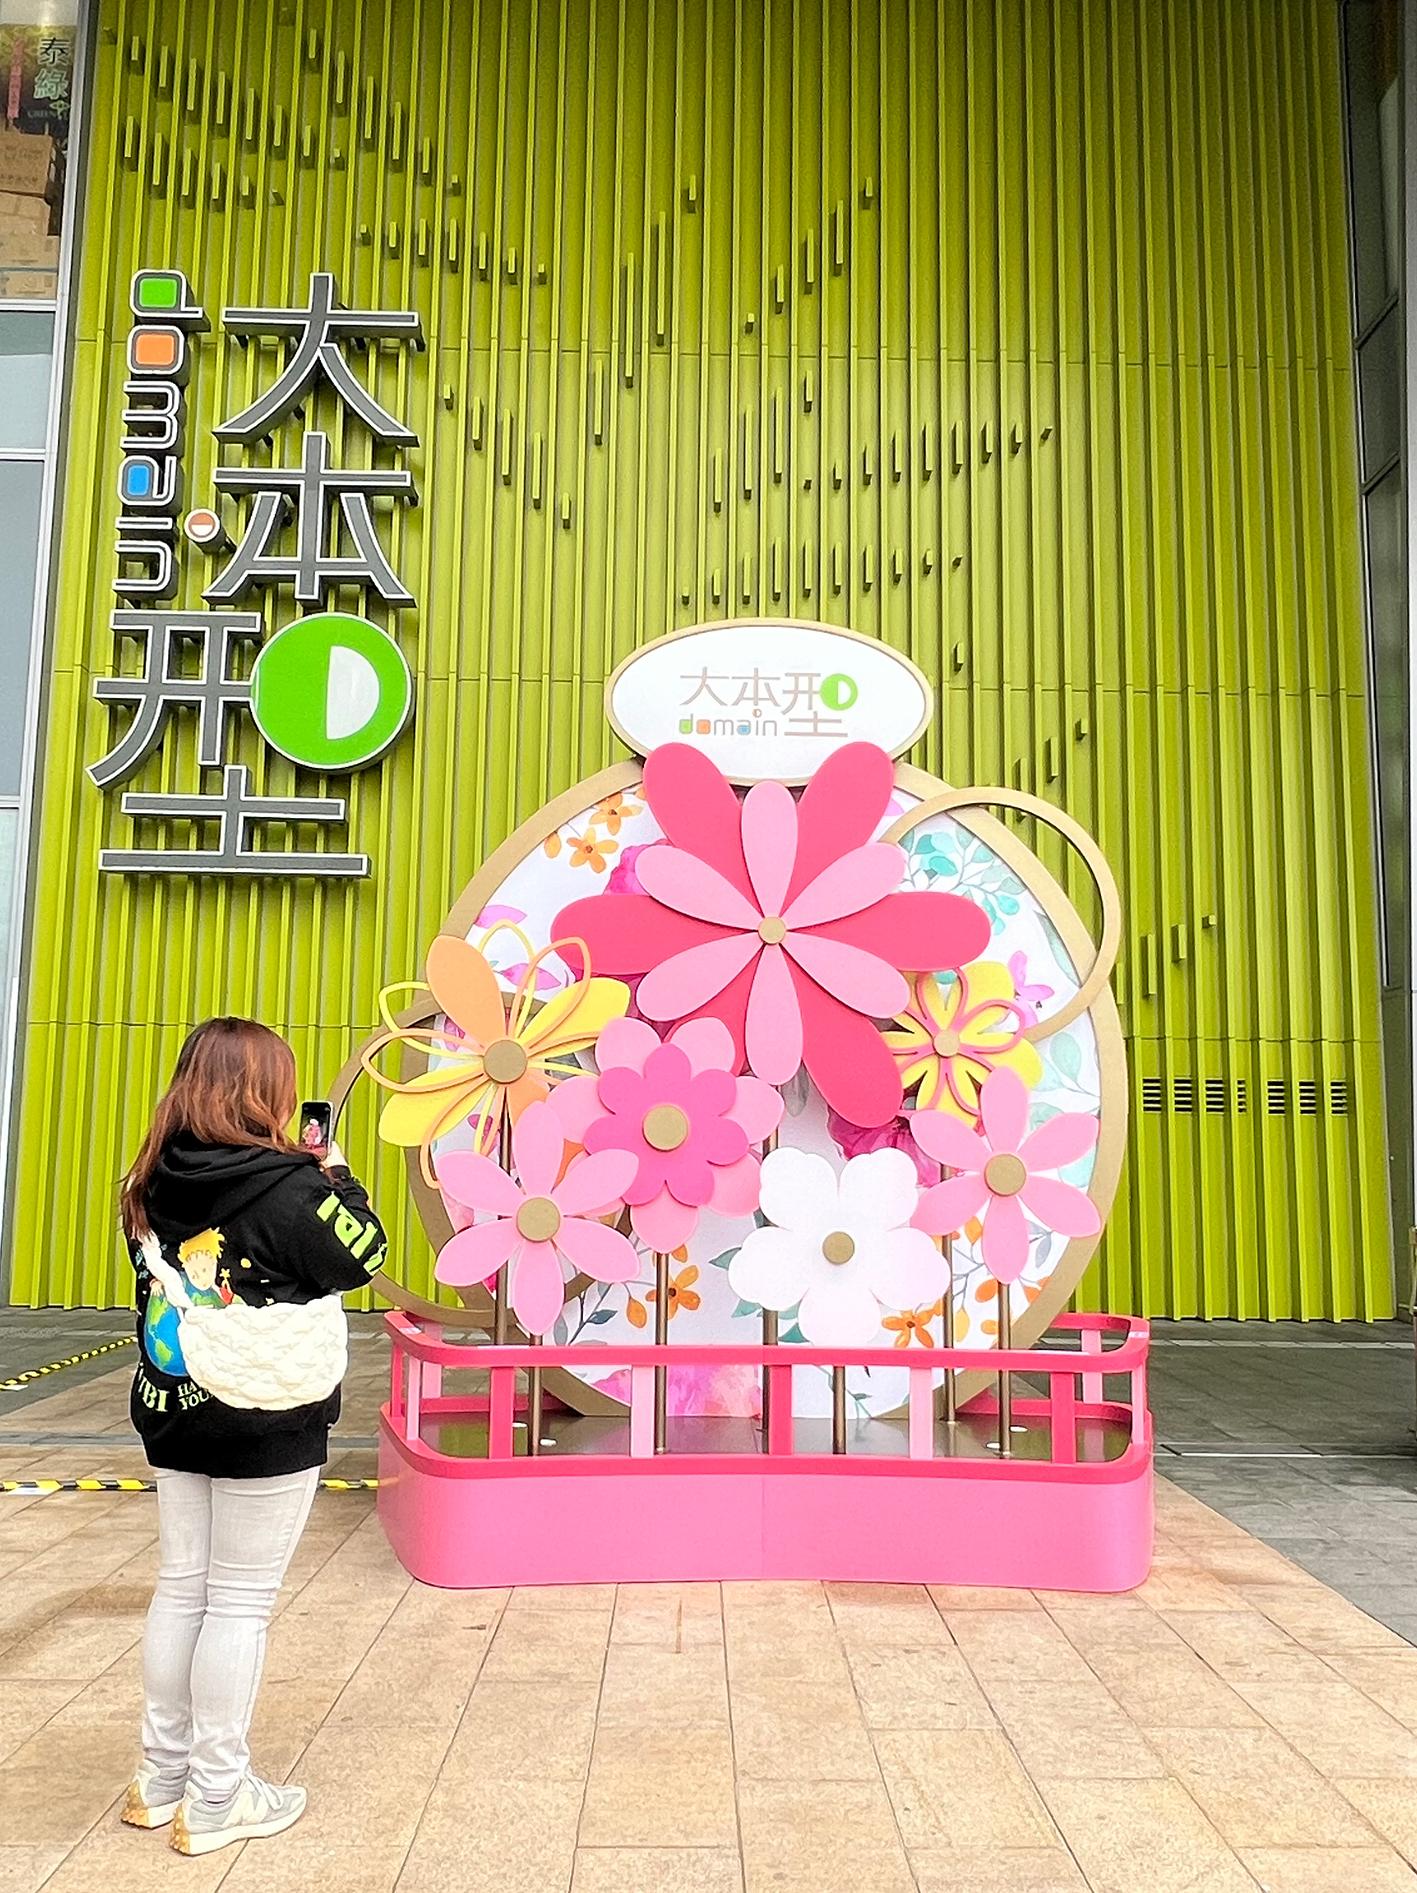 To welcome the Year of the Dragon, the Hong Kong Housing Authority has arranged celebratory events for shoppers to celebrate the new year and help boost the economy. Photo shows a floral festive decoration at the Open Plaza of the regional shopping centre, Domain, in Yau Tong.